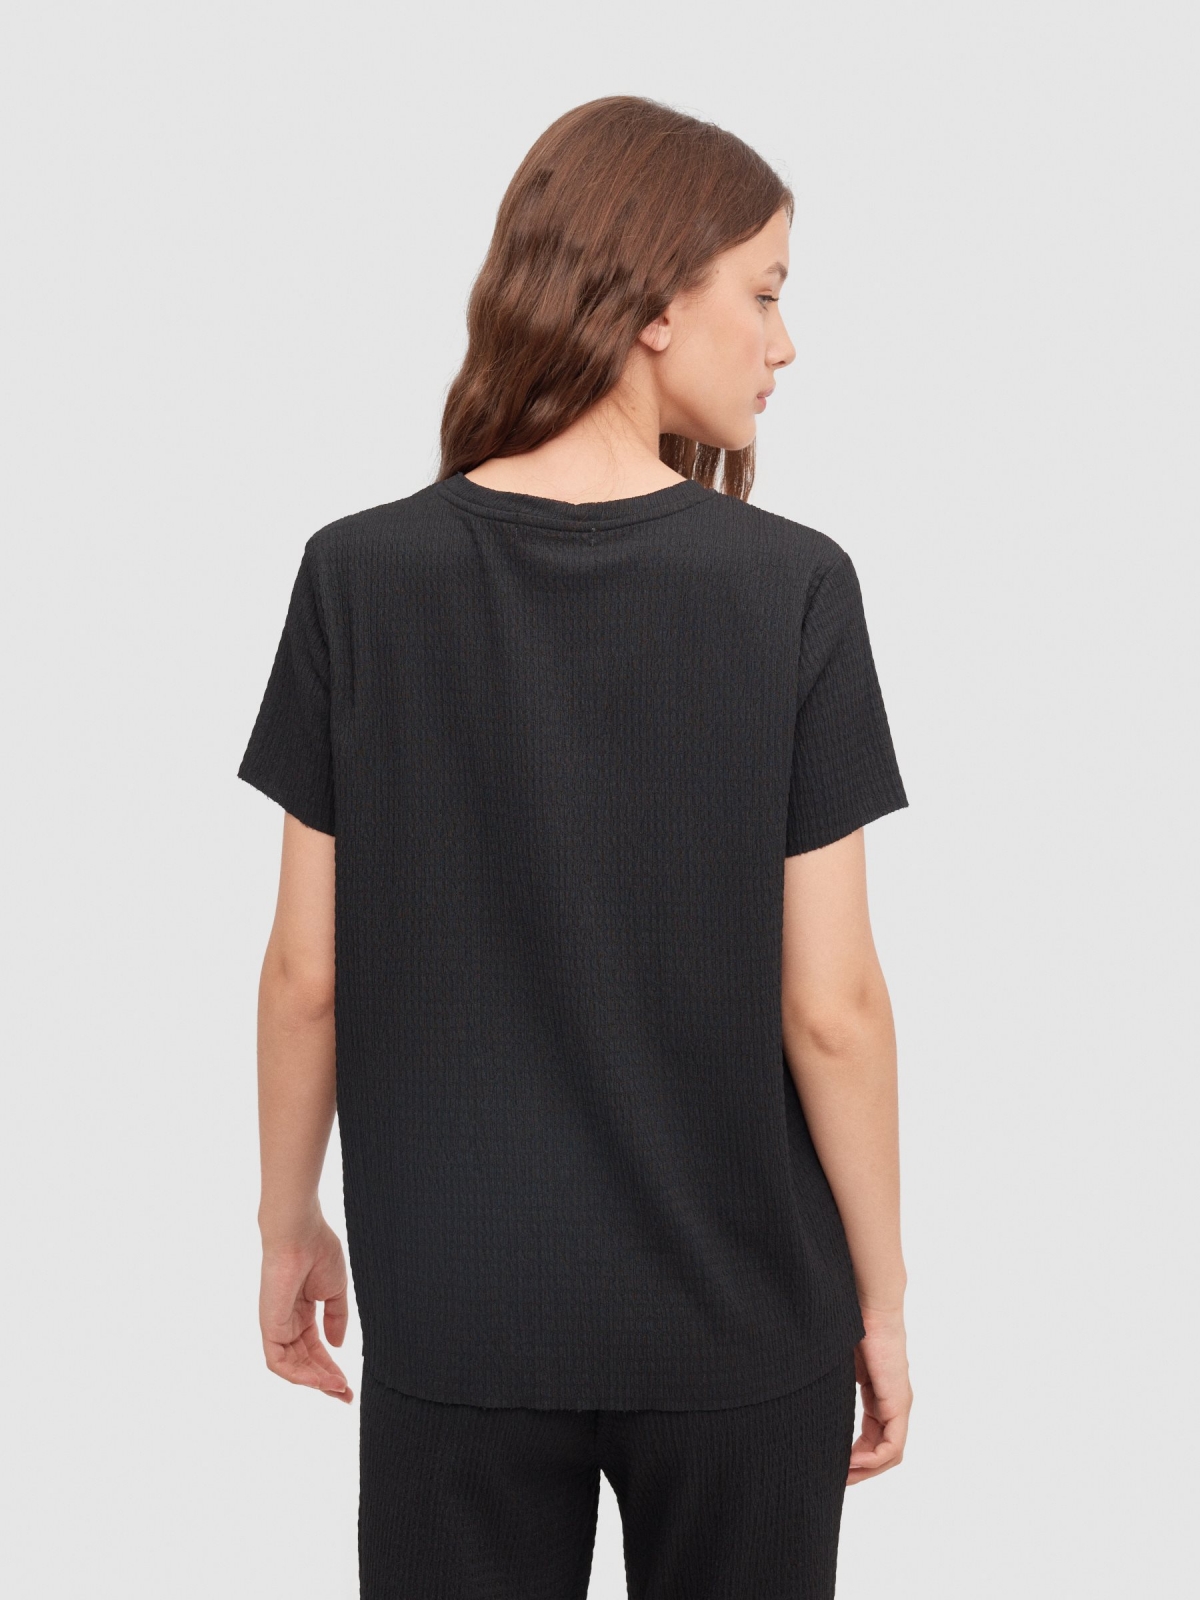 Fluid textured T-shirt black middle back view